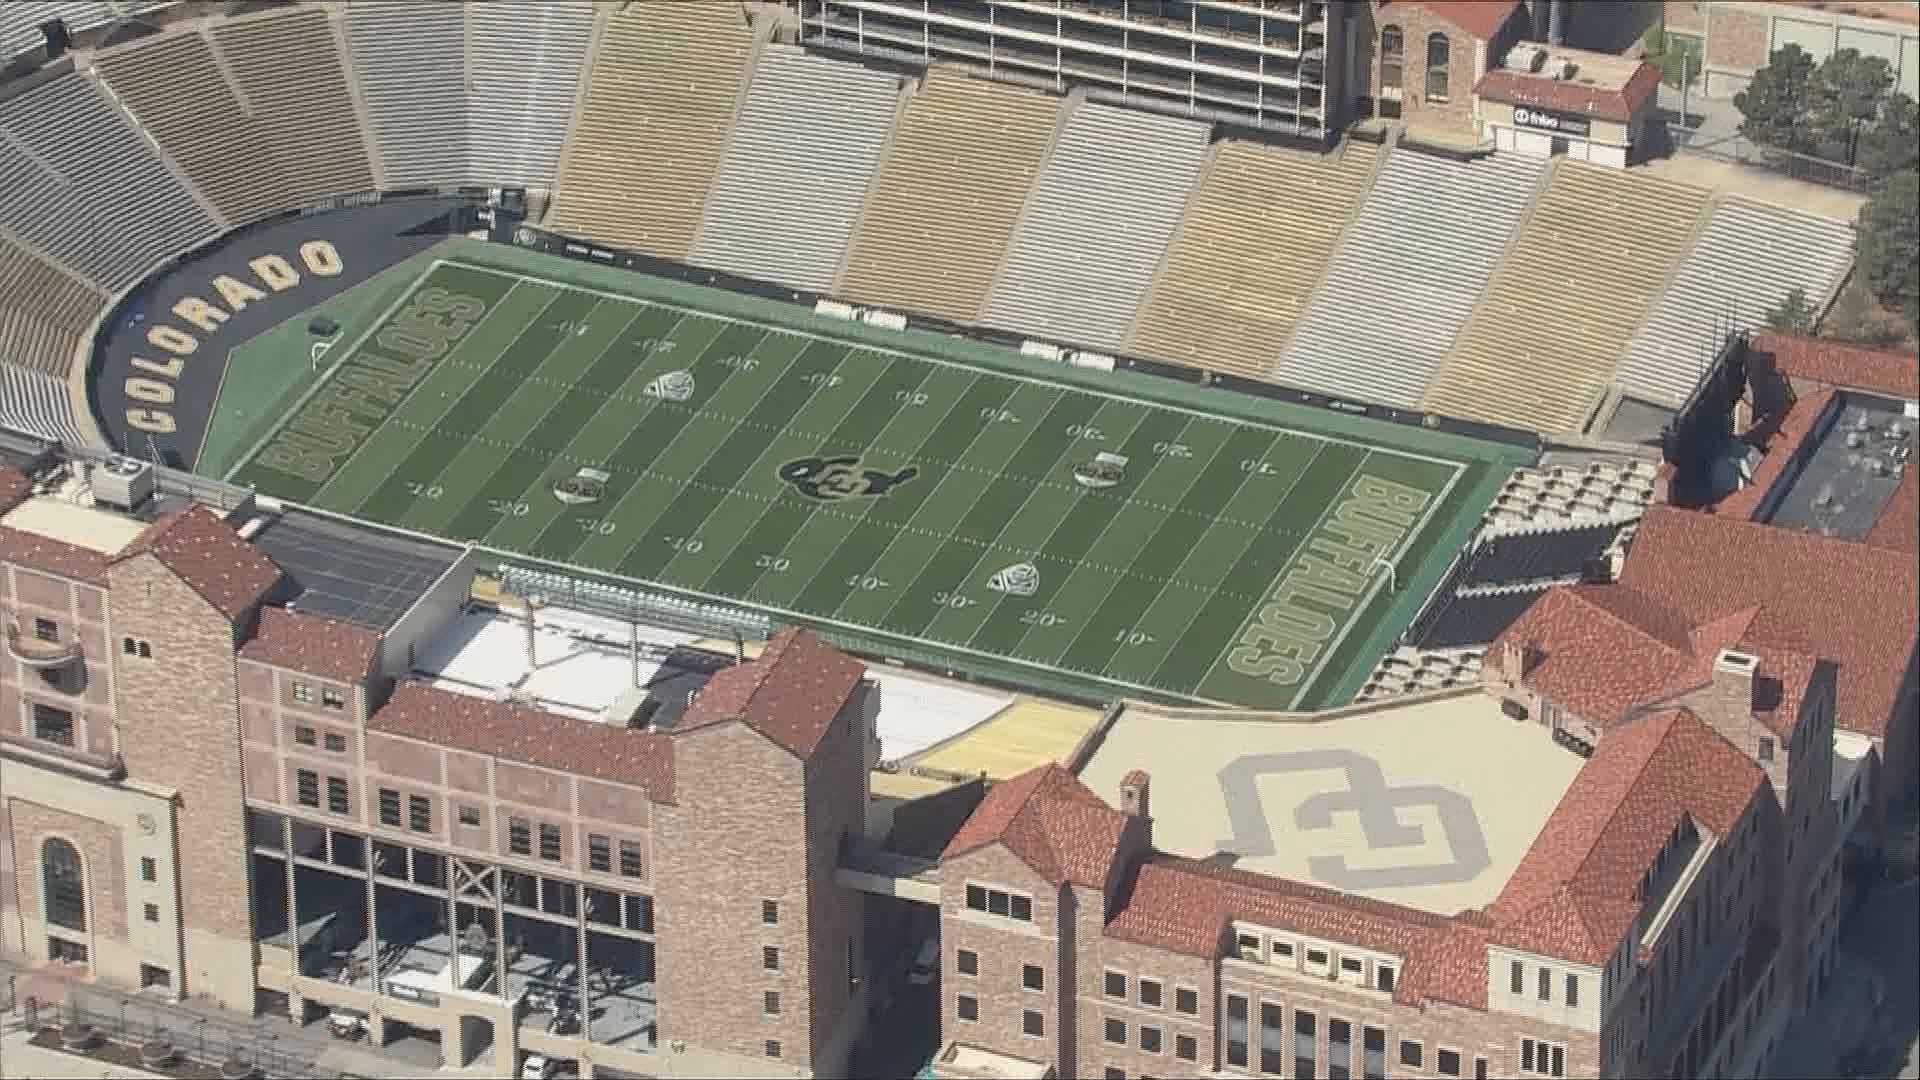 CU Athletics said its Black and Gold Weekend will feature festivities over multiple days including the spring game, a CU football alumni reunion and talent show.